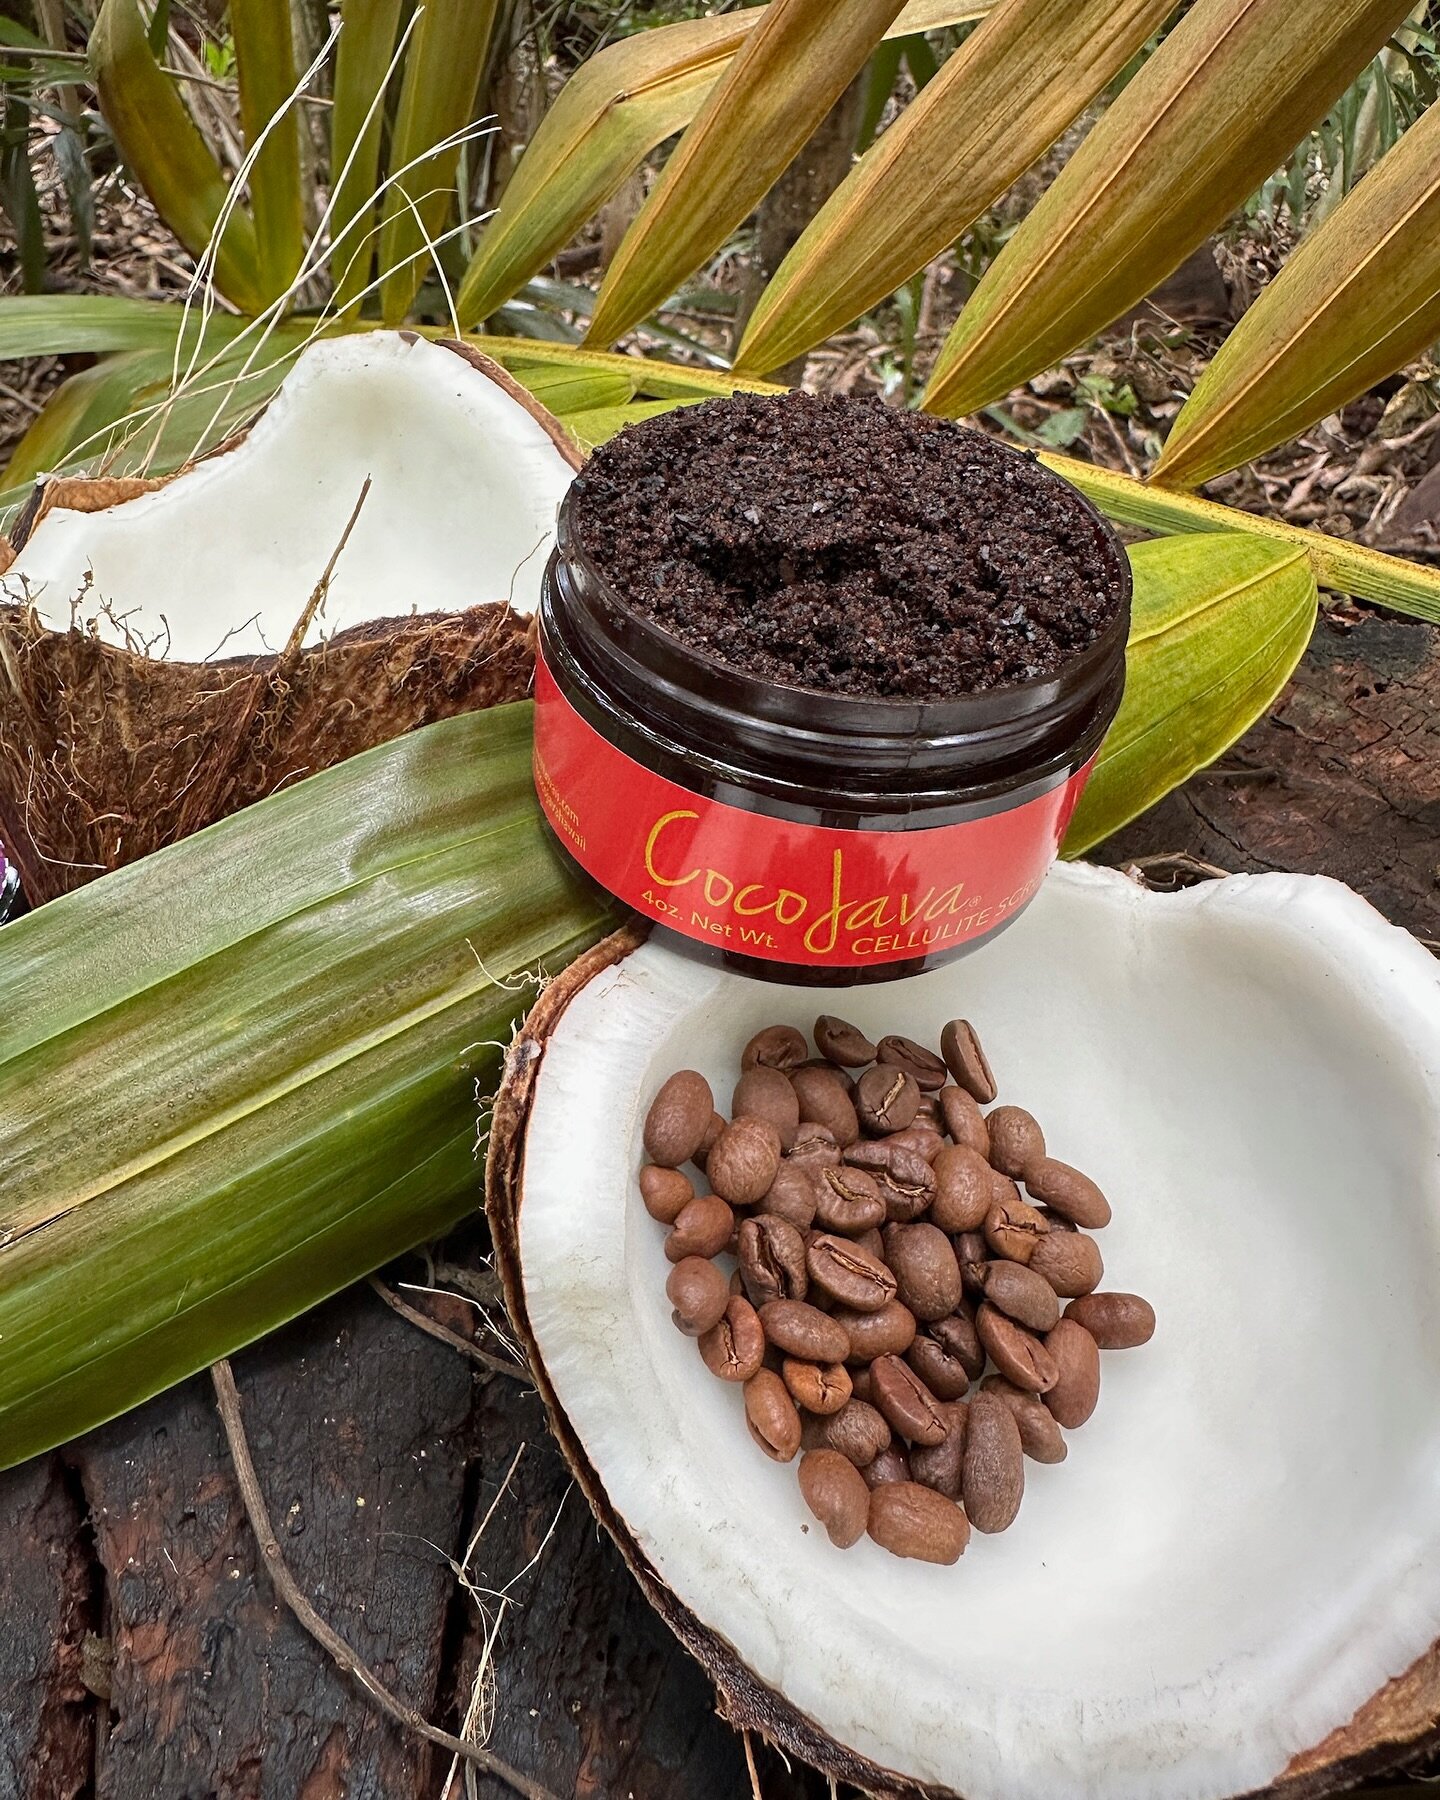 Indulge in this amazing cellulite scrub featuring Hawaiian coffee and coconut! ❤️❤️